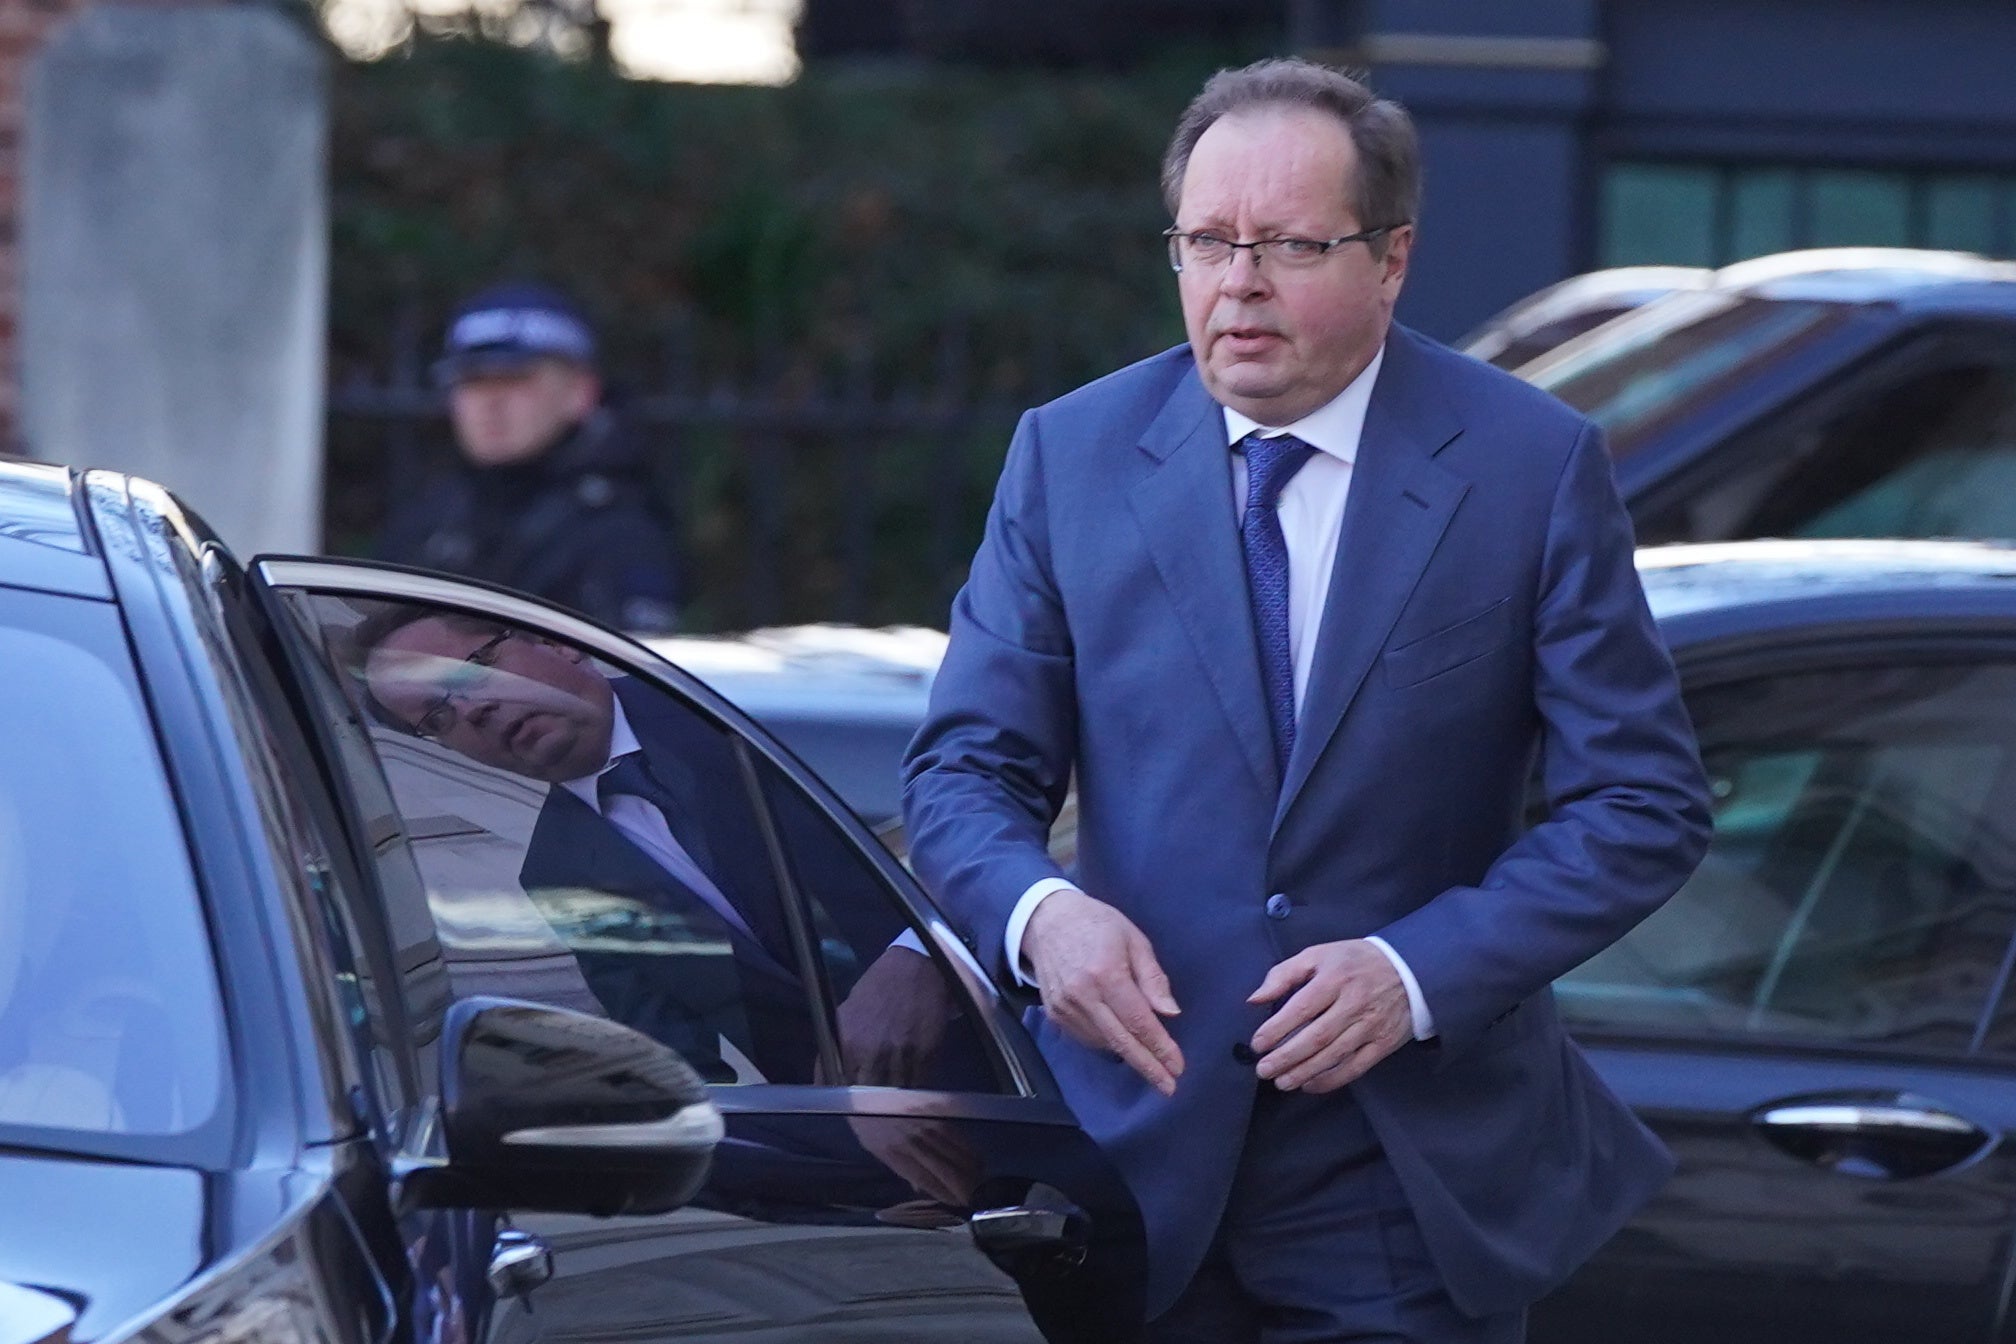 Russian Federation ambassador leaving the Foreign Office after being summoned by Liz Truss on 24 February, 2022